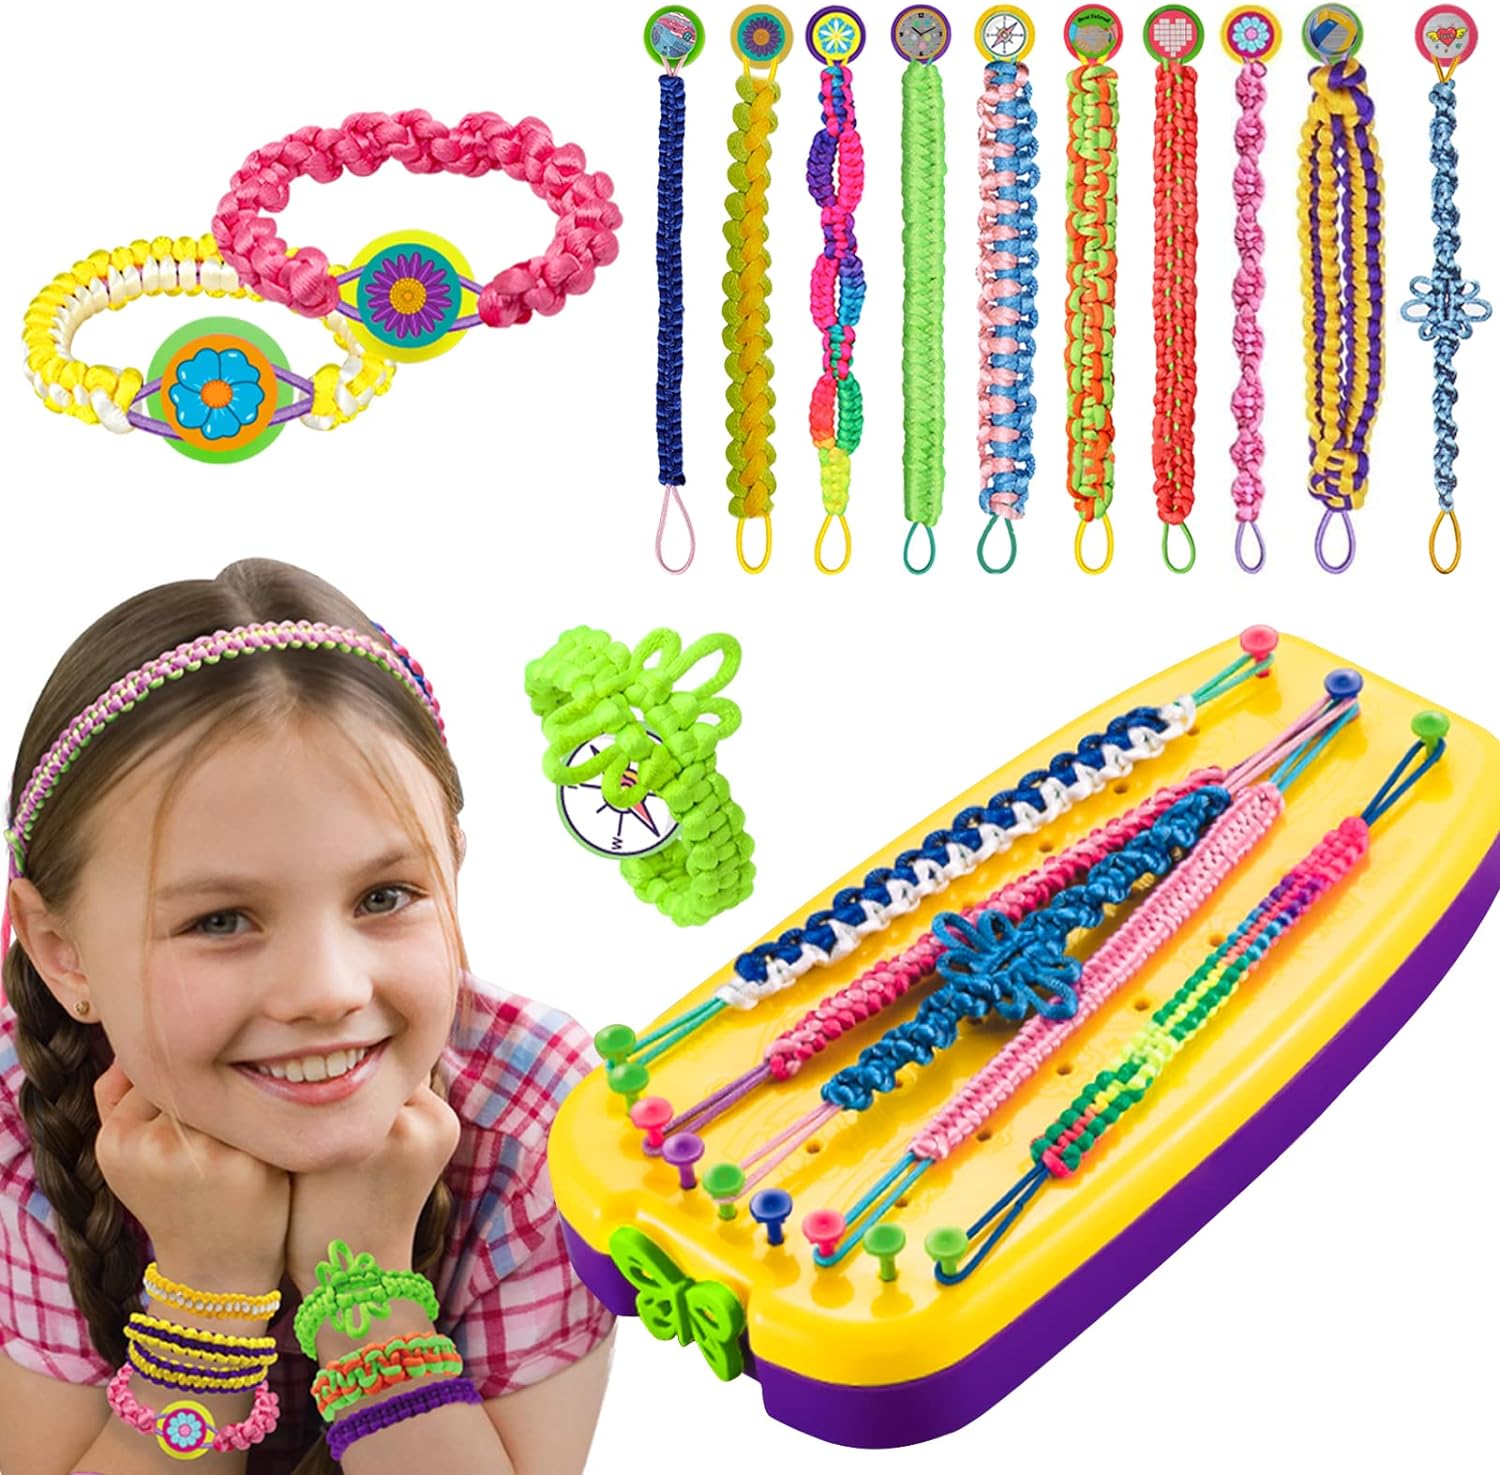 UUEMB Friendship Bracelet Making Kit, Bracelet Gifts for Teenage Girls Ages 7-12 Years Old, DIY Friendship Bracelet Arts and Craft Kit Girl's Toys for Present, Party, Birthday Gift